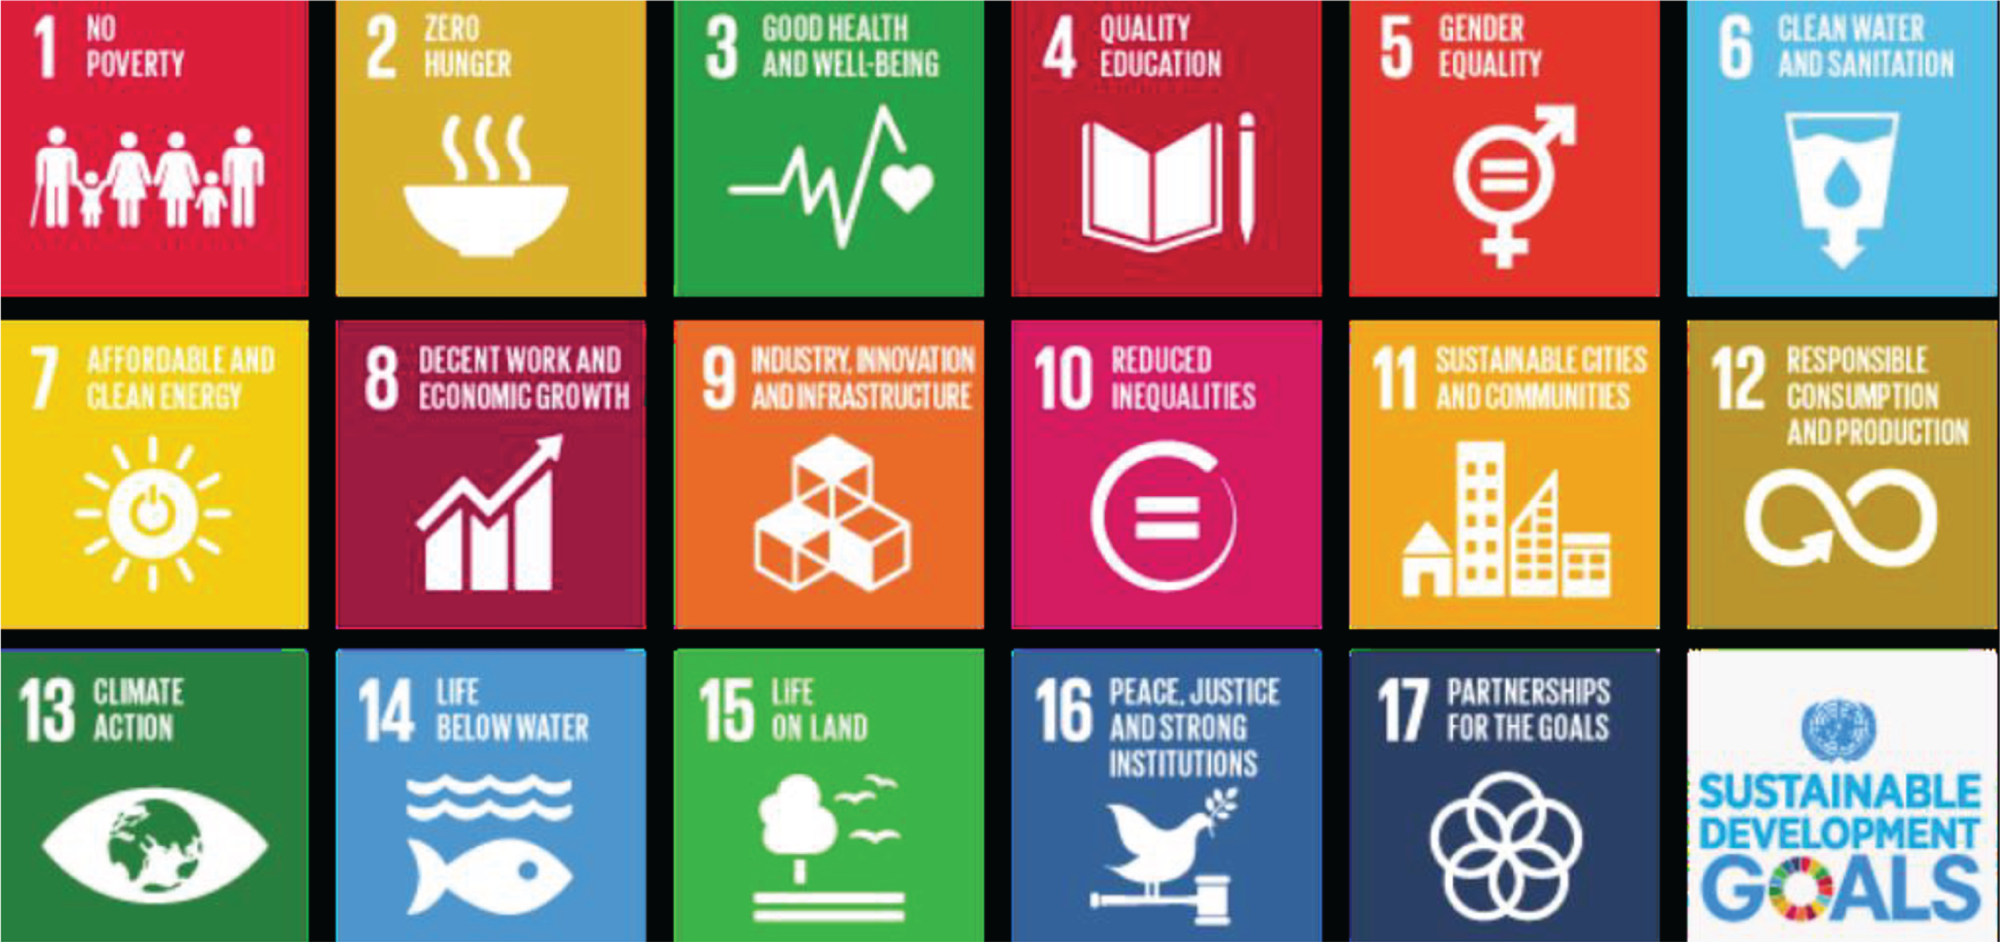 Schematic illustration of united Nations sustainable development goals.